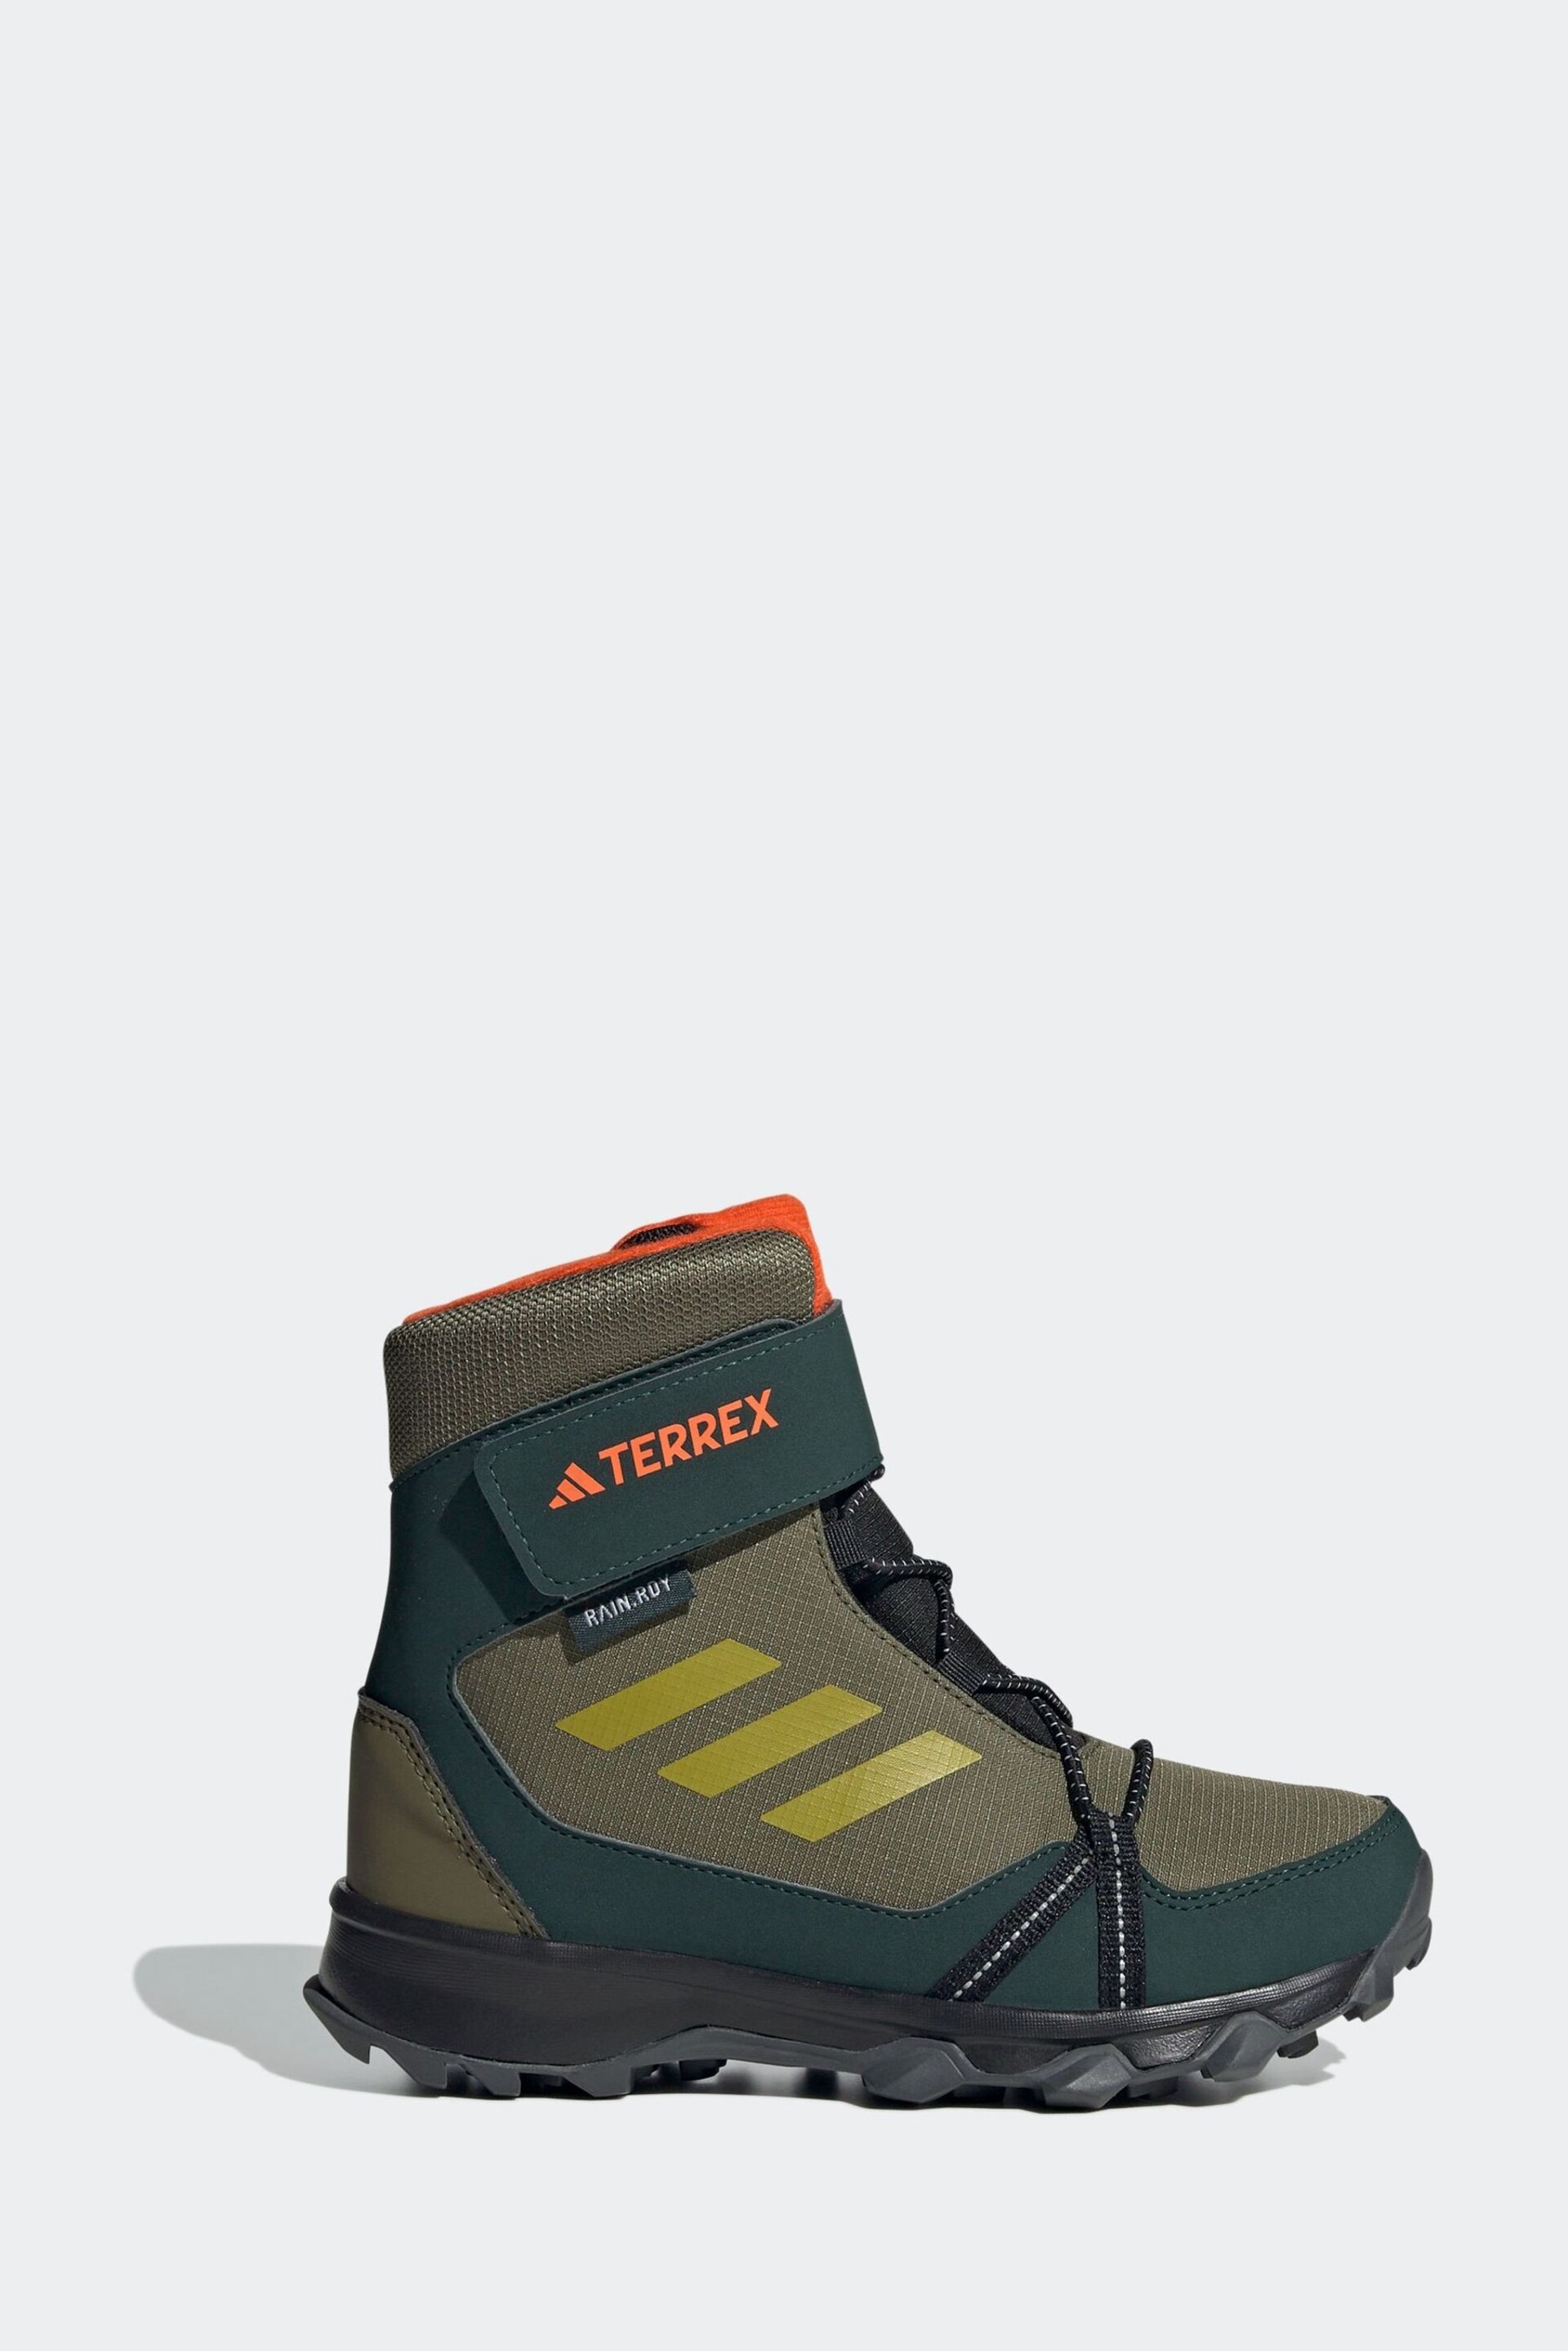 adidas Green Terrex Snow Hook-And-Loop Cold.Rdy Winter Boots - Image 1 of 9